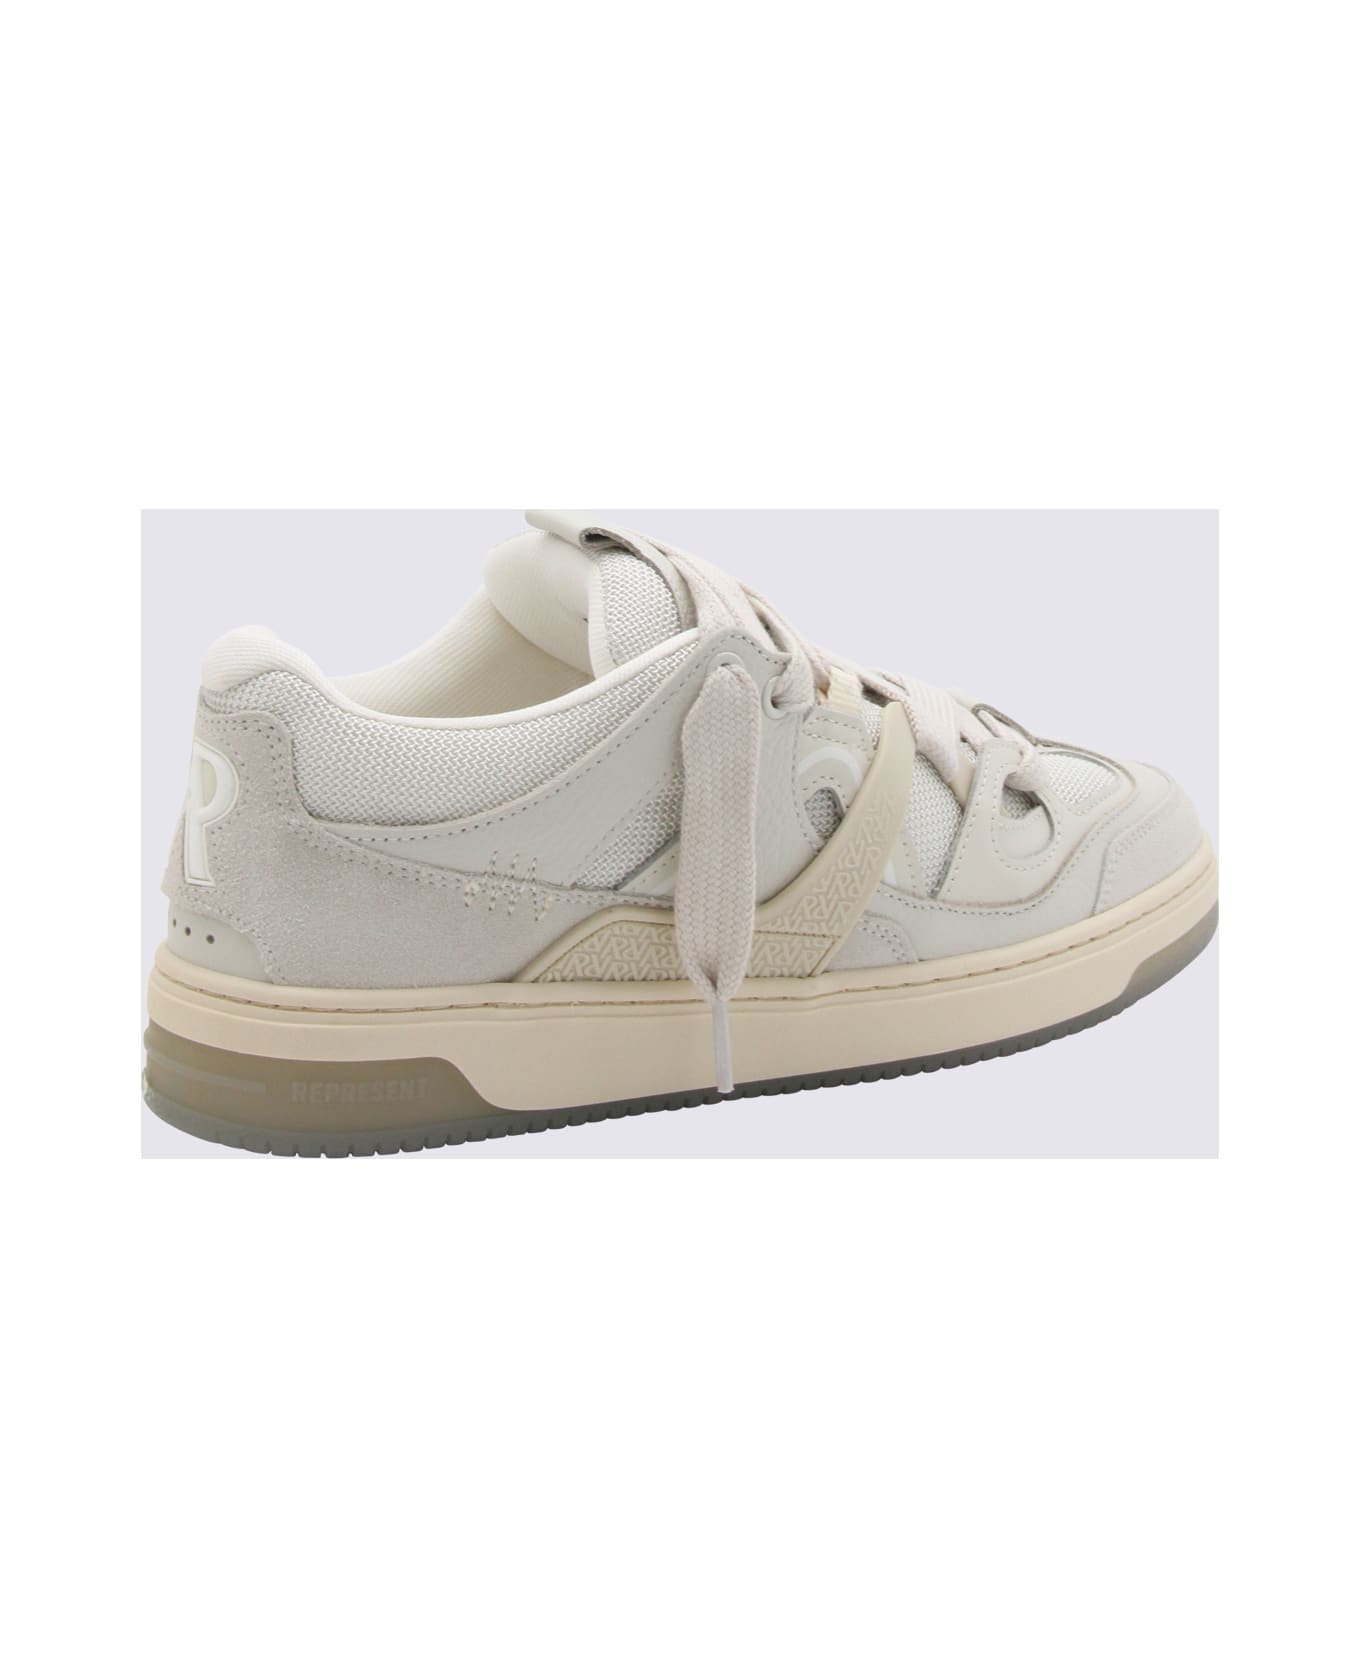 REPRESENT White Leather Sneakers - FLAT WHITE スニーカー